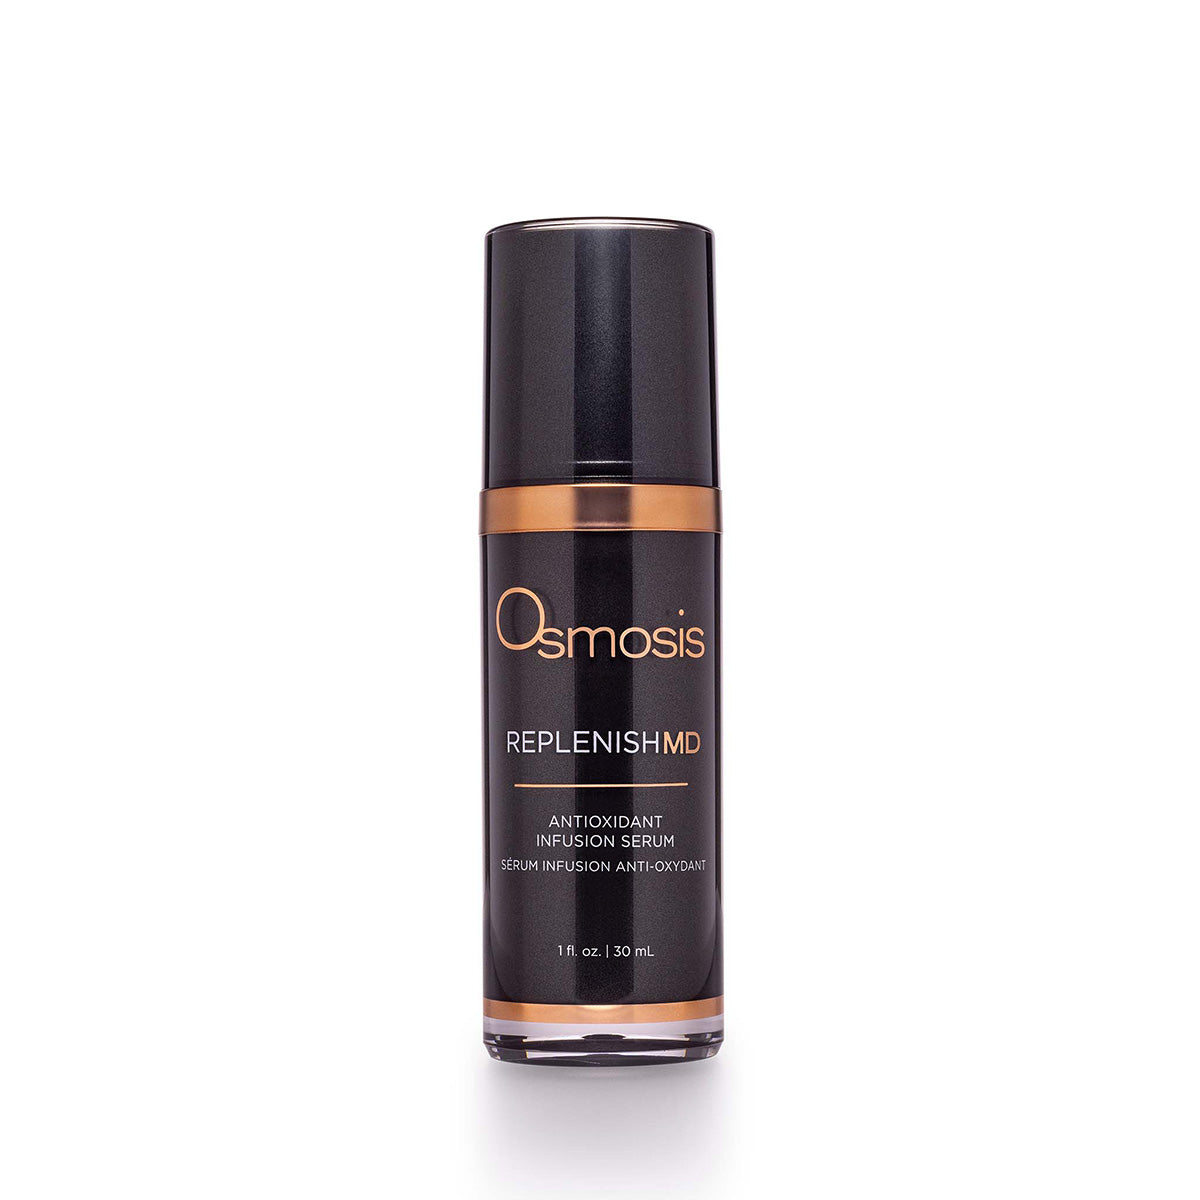 Osmosis Skincare Replenish MD has high antioxidants to reduce the effects of sun damage and restores healthy skin.